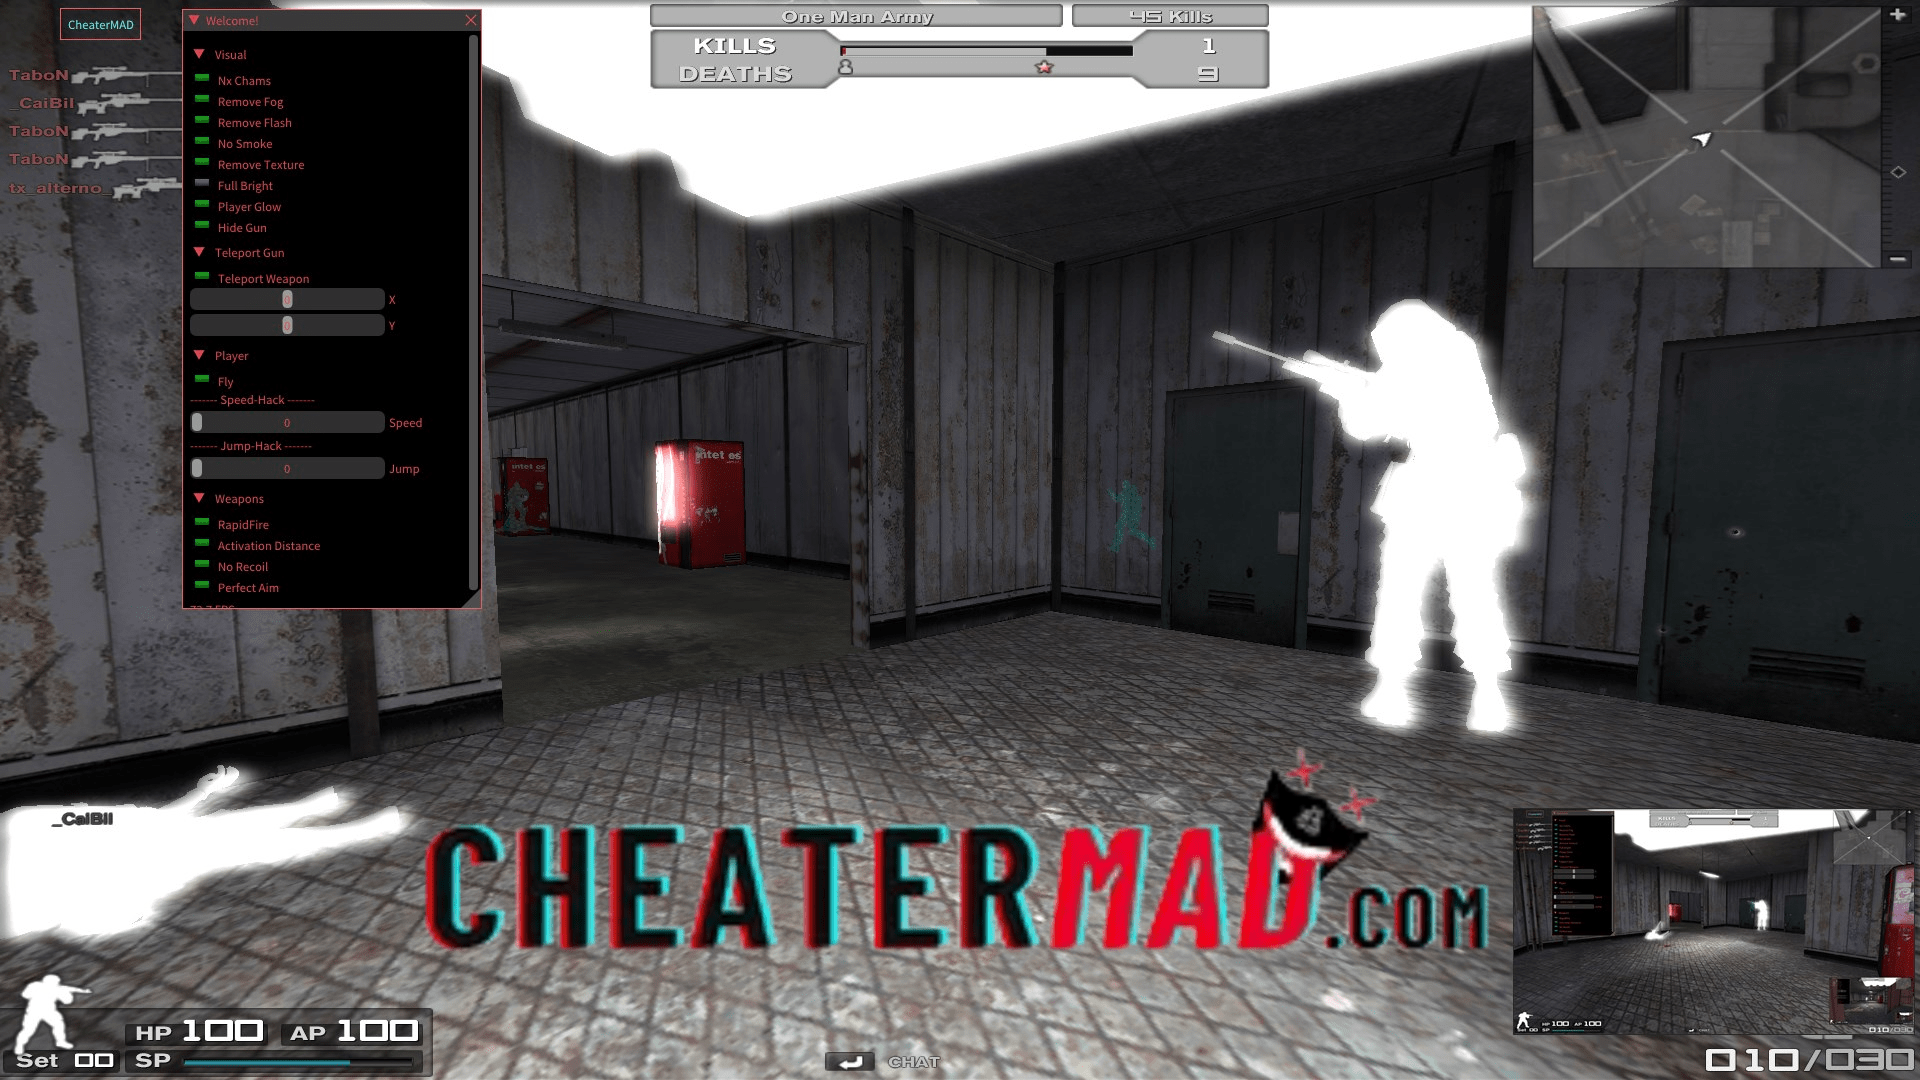 Free Updated Cheats And Hacks Download Site Cheatermad Com - roblox hack mad games